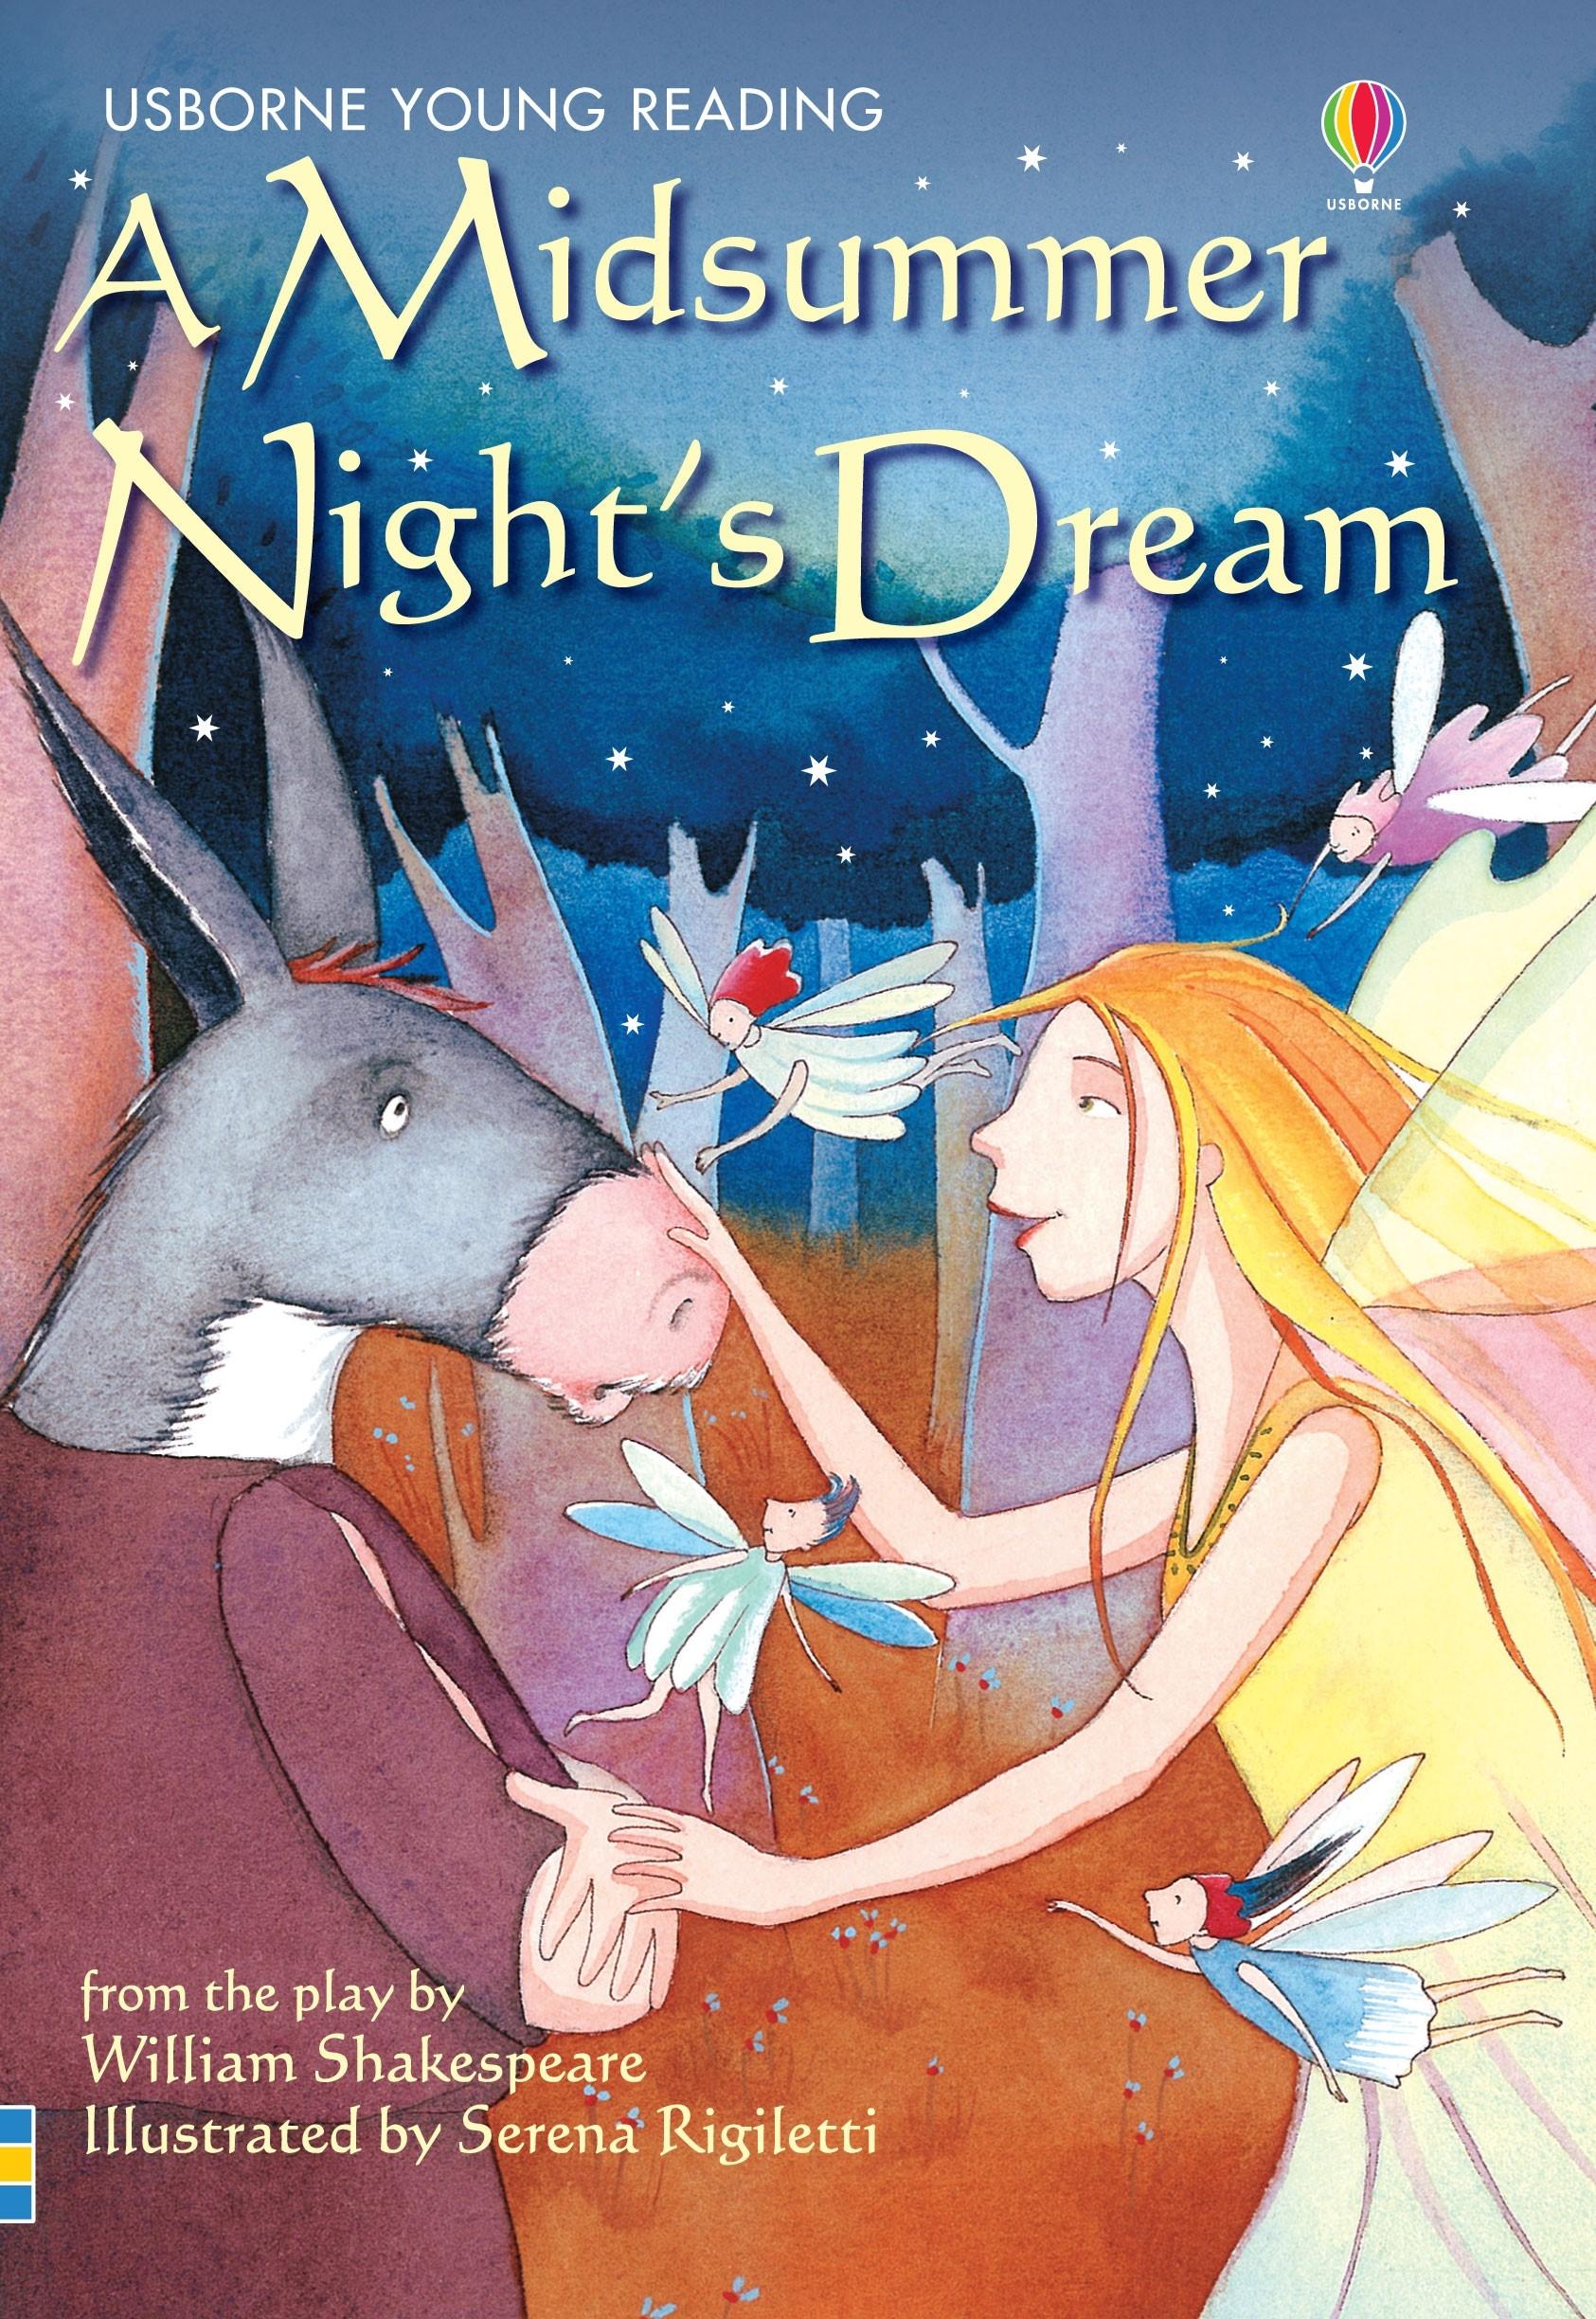 A Midsummer Night's Dream / Lesley Sims / Buch / Young Reading Series 2 / 64 S. / Englisch / 2005 / Usborne Publishing Ltd / EAN 9780746063330 - Sims, Lesley